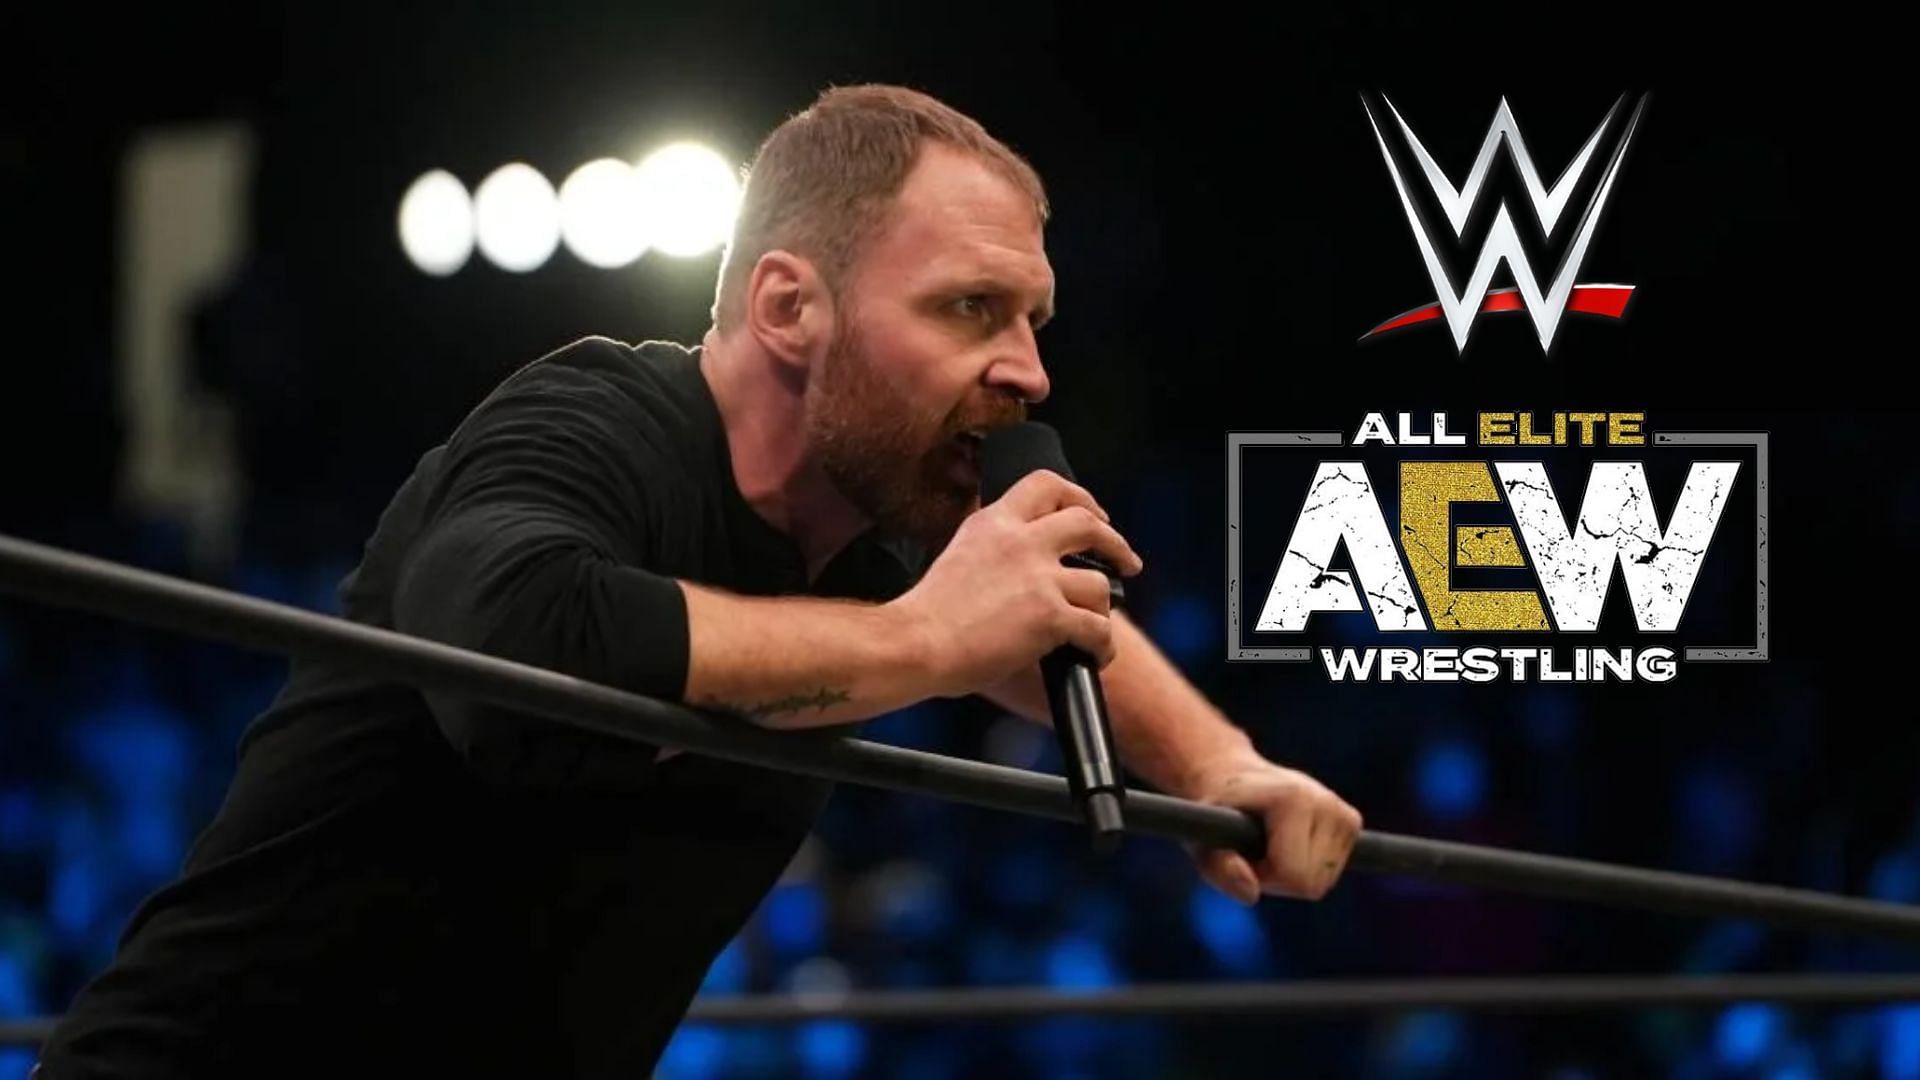 Jon Moxley is on an intense feud with this young AEW star.